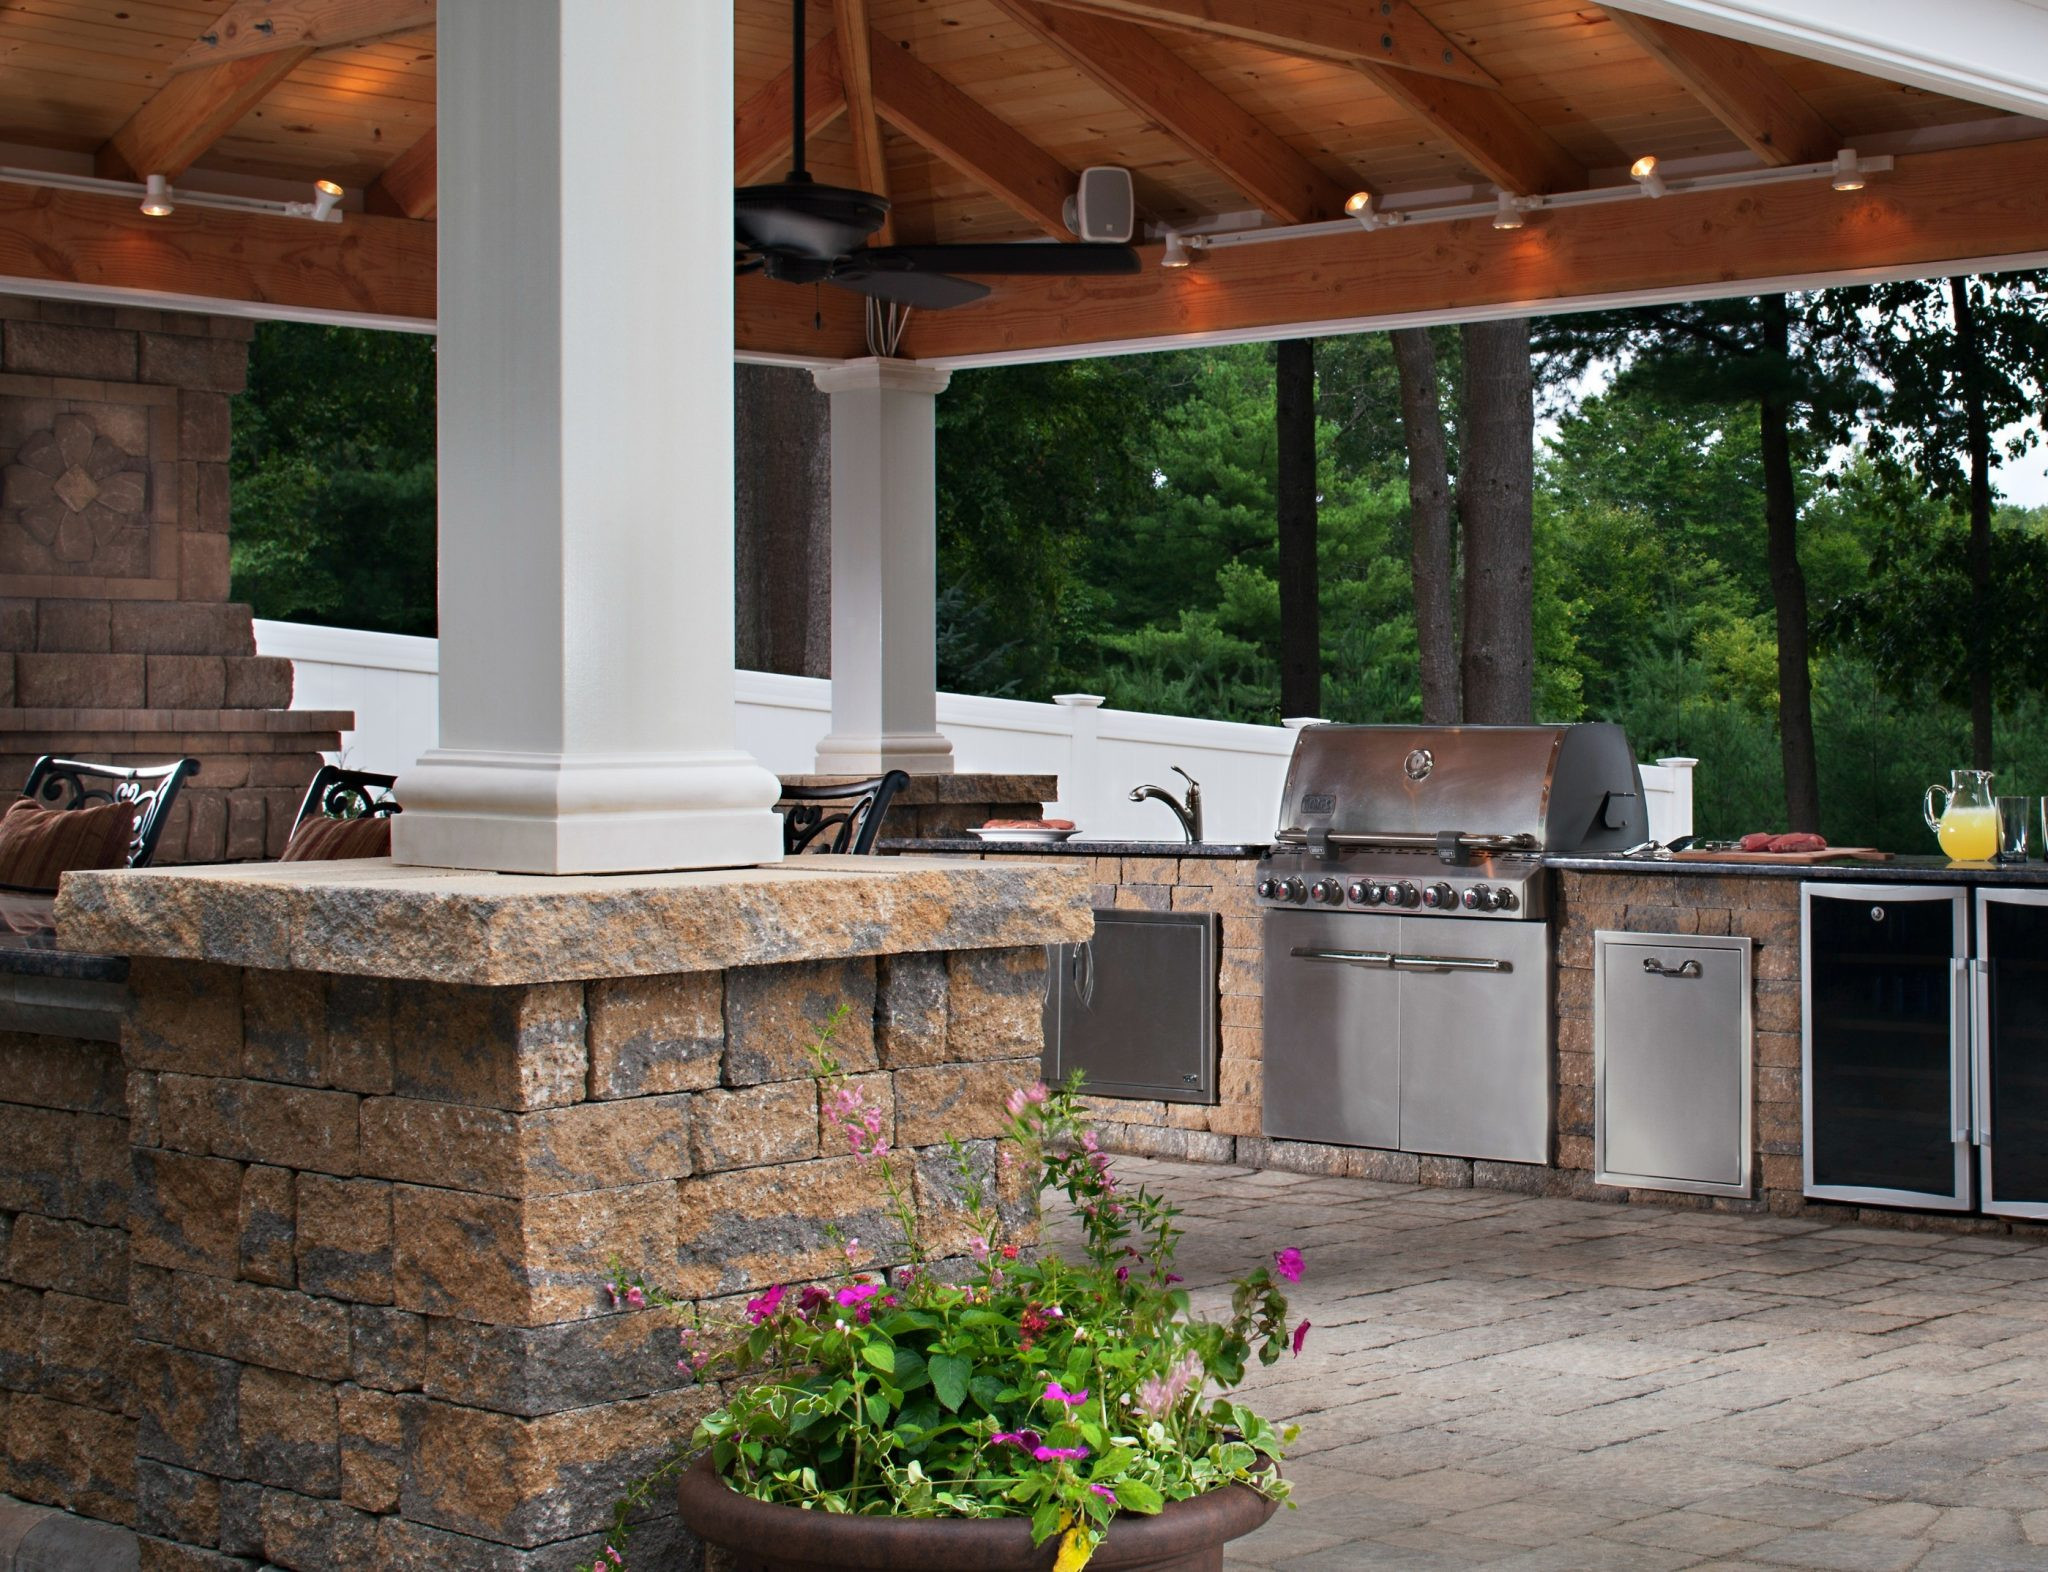 Patio Outdoor Kitchen
 Outdoor Kitchen Trends 9 HOT Ideas For Your Backyard